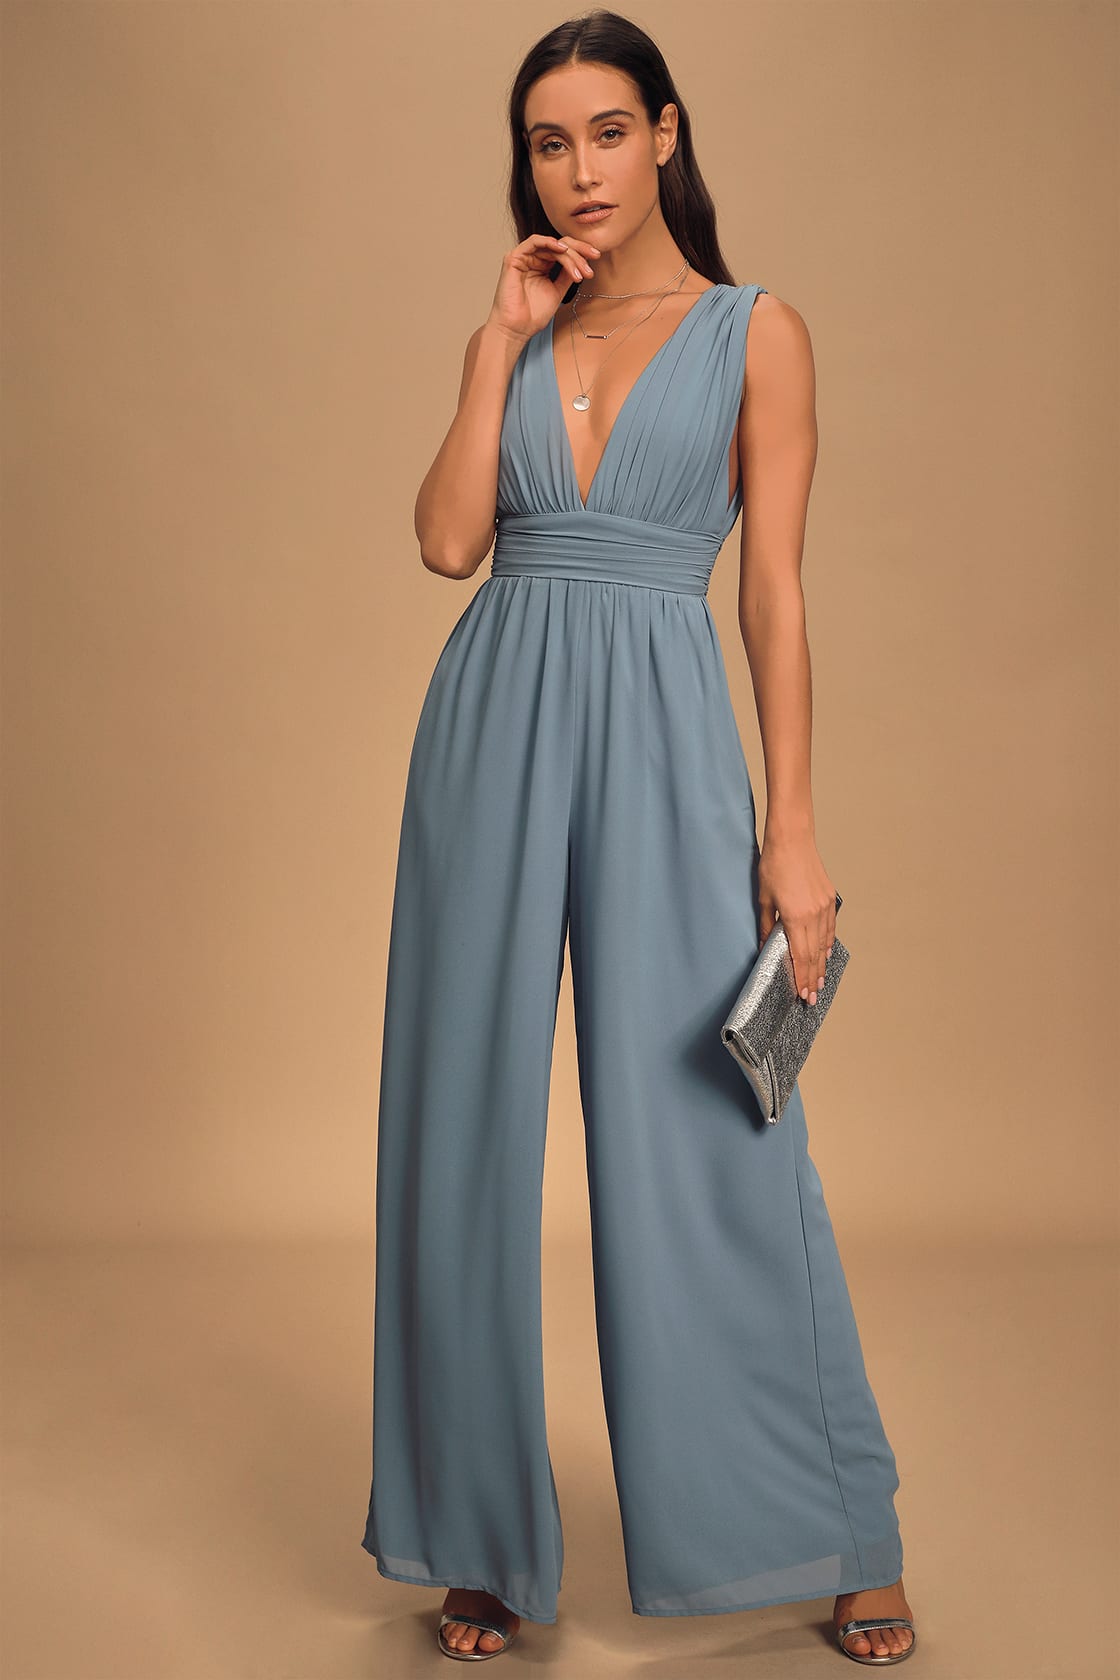 Slate Blue and Light Blue-Gray Jumpsuit for Spring Wedding Guest